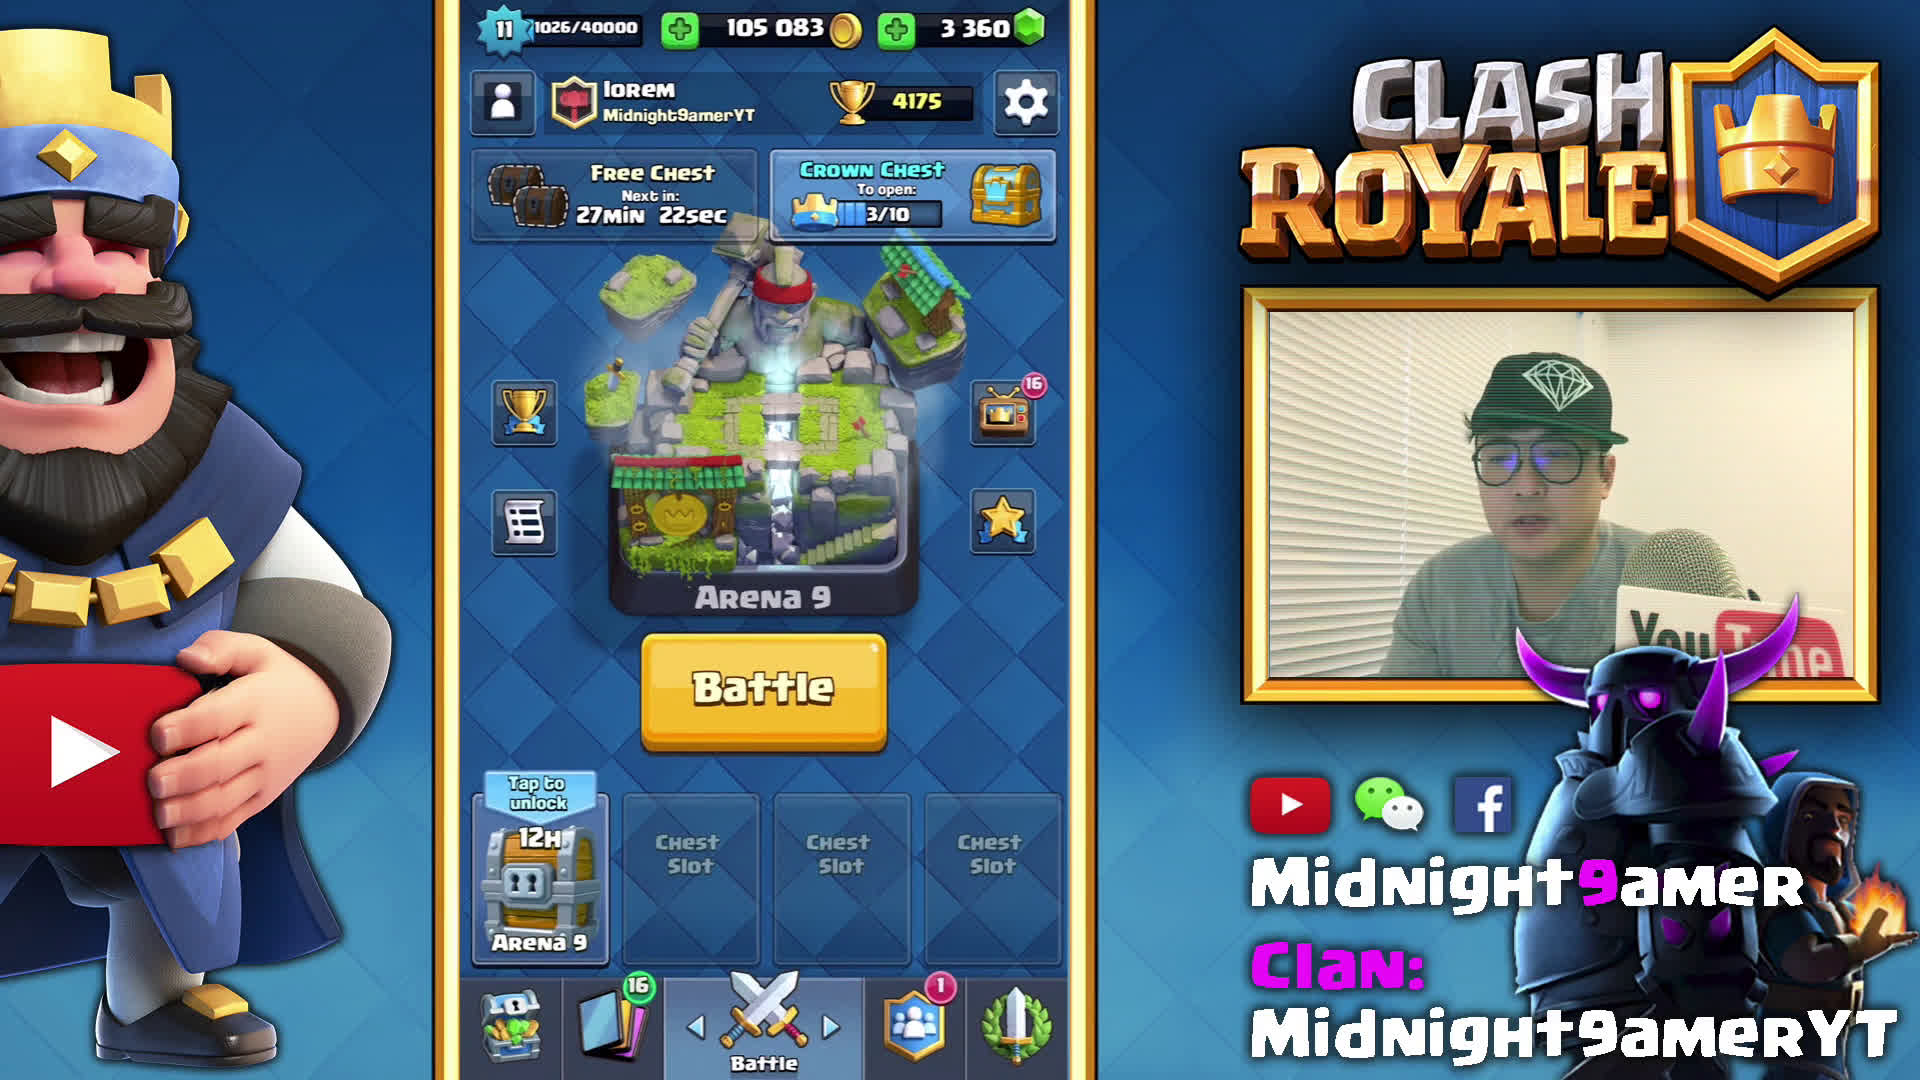 Clash Royale Hacks, Mods for Android and iOS No Human Verification 2019